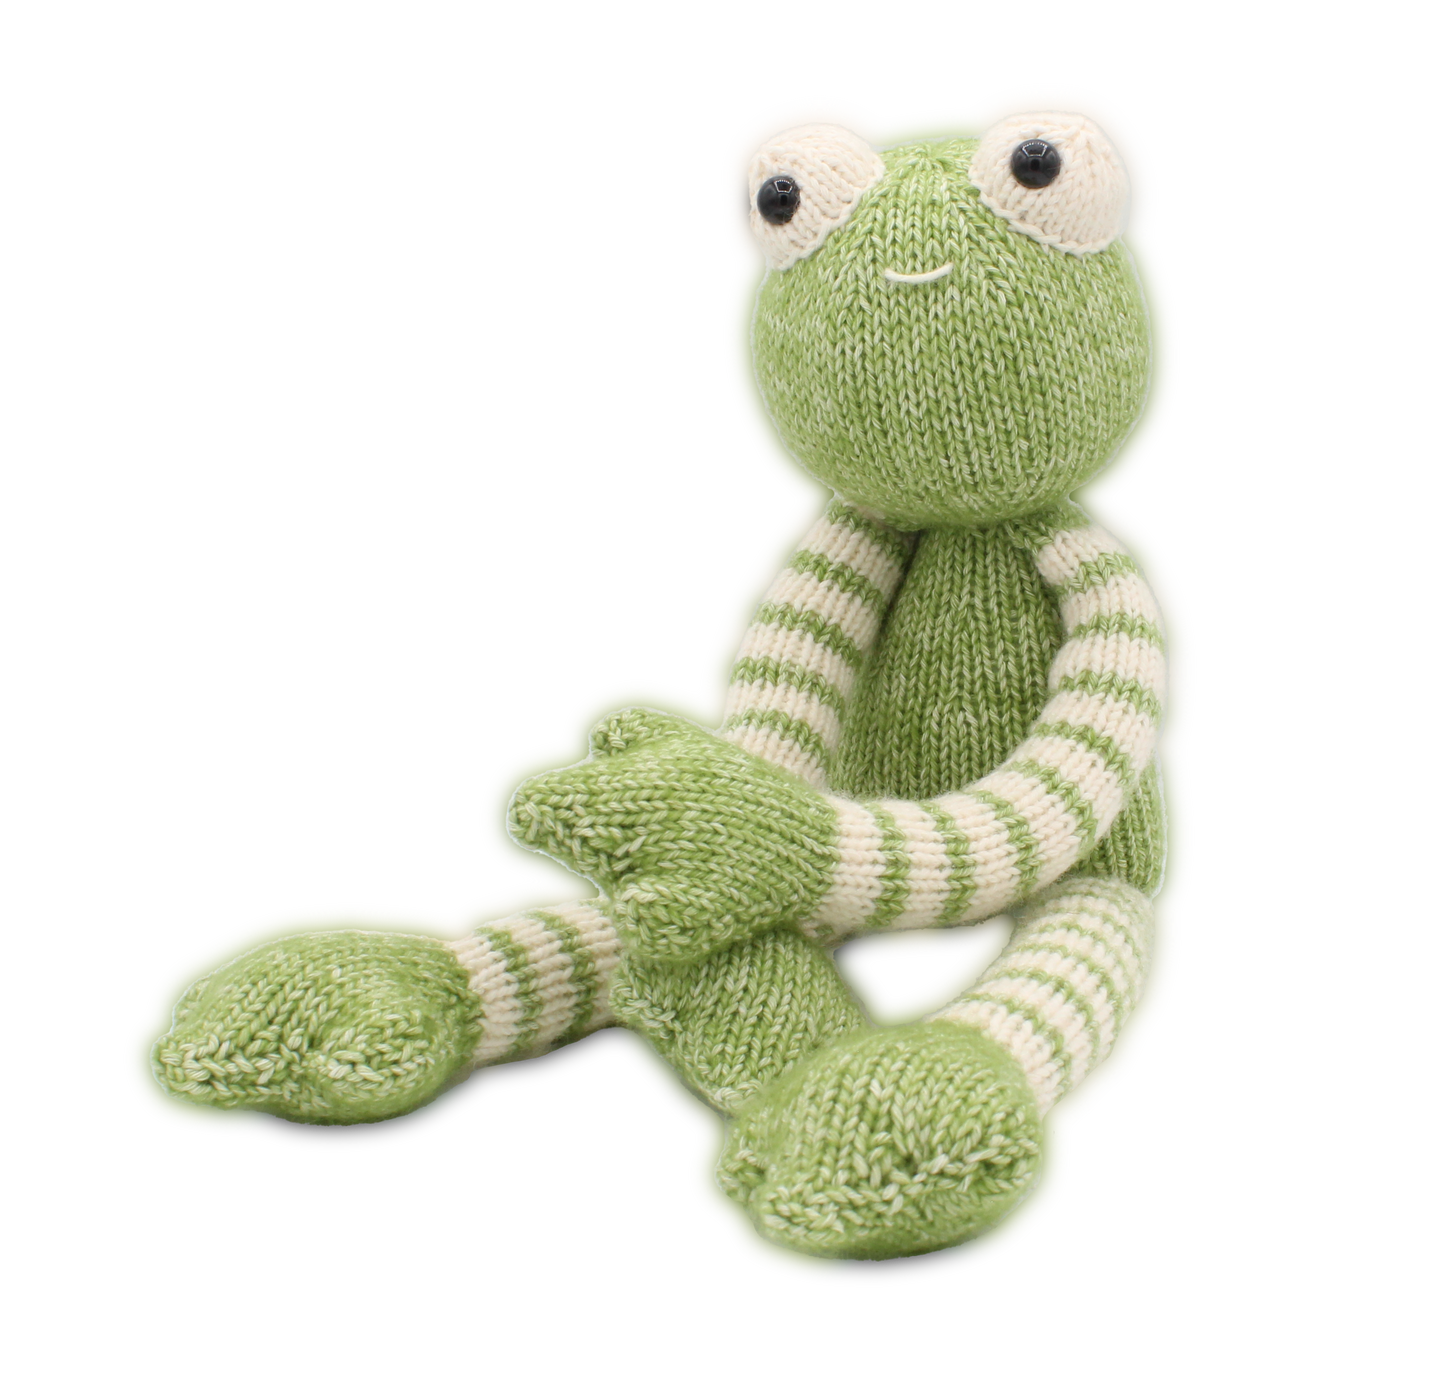 Timmy the Green Frog - Delightful Knitting Kit from Hardicraft